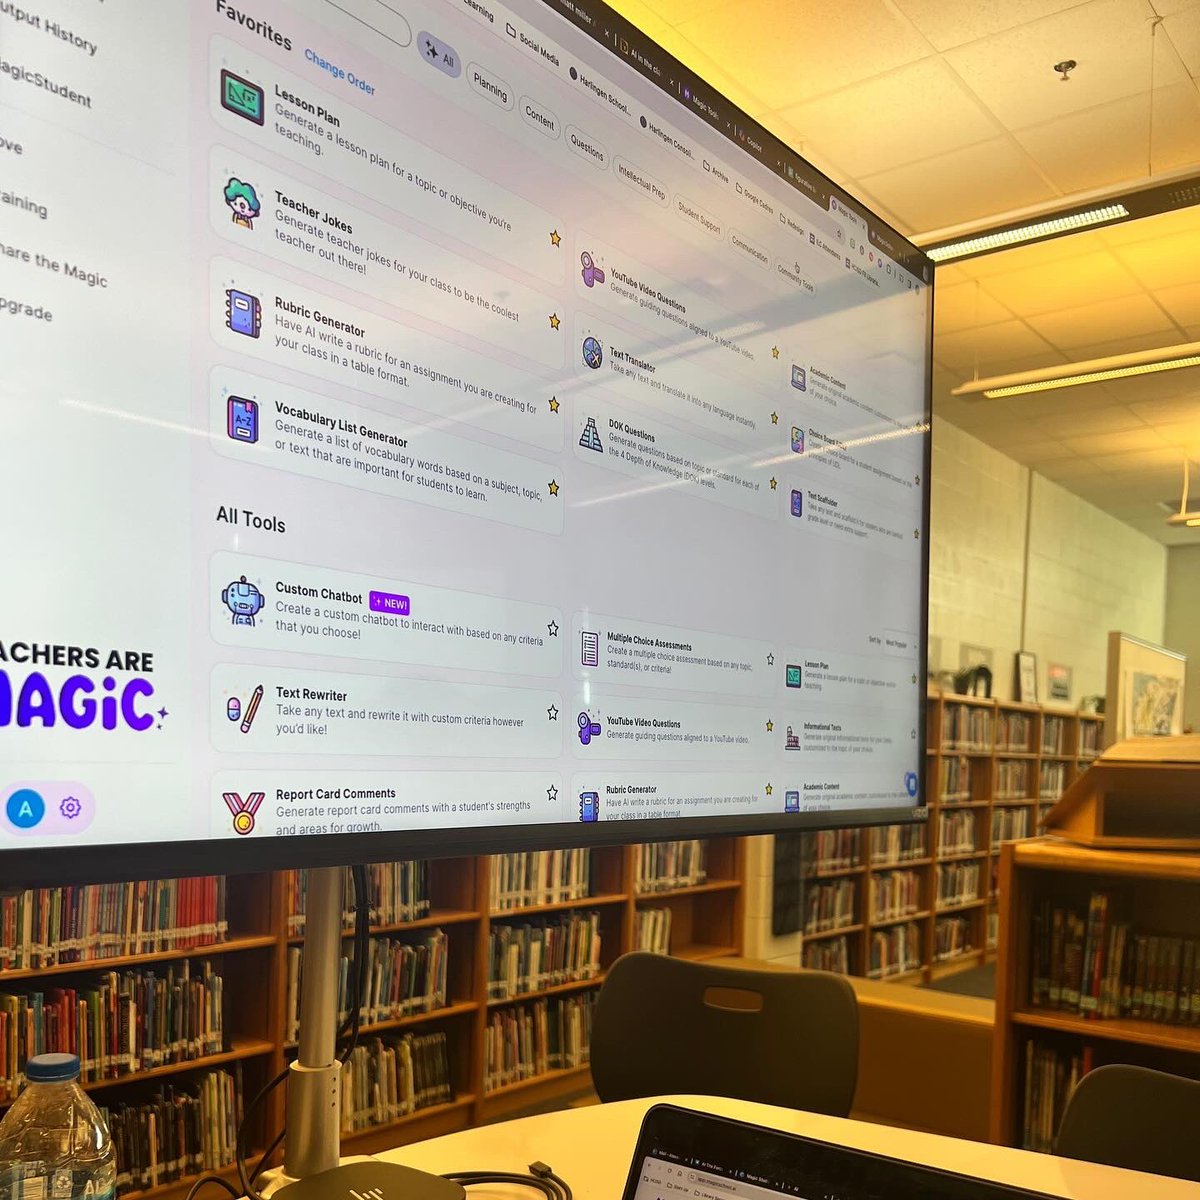 Quality time with our school district librarians makes my heart sing 🎶💜 We had great conversations surrounding digital learning and Intro to AI! You know MagicSchool.ai made a cameo! Our librarians are magic🪄✨ #hcisdlibraries #futurereadylibs #AI #schoollibrary